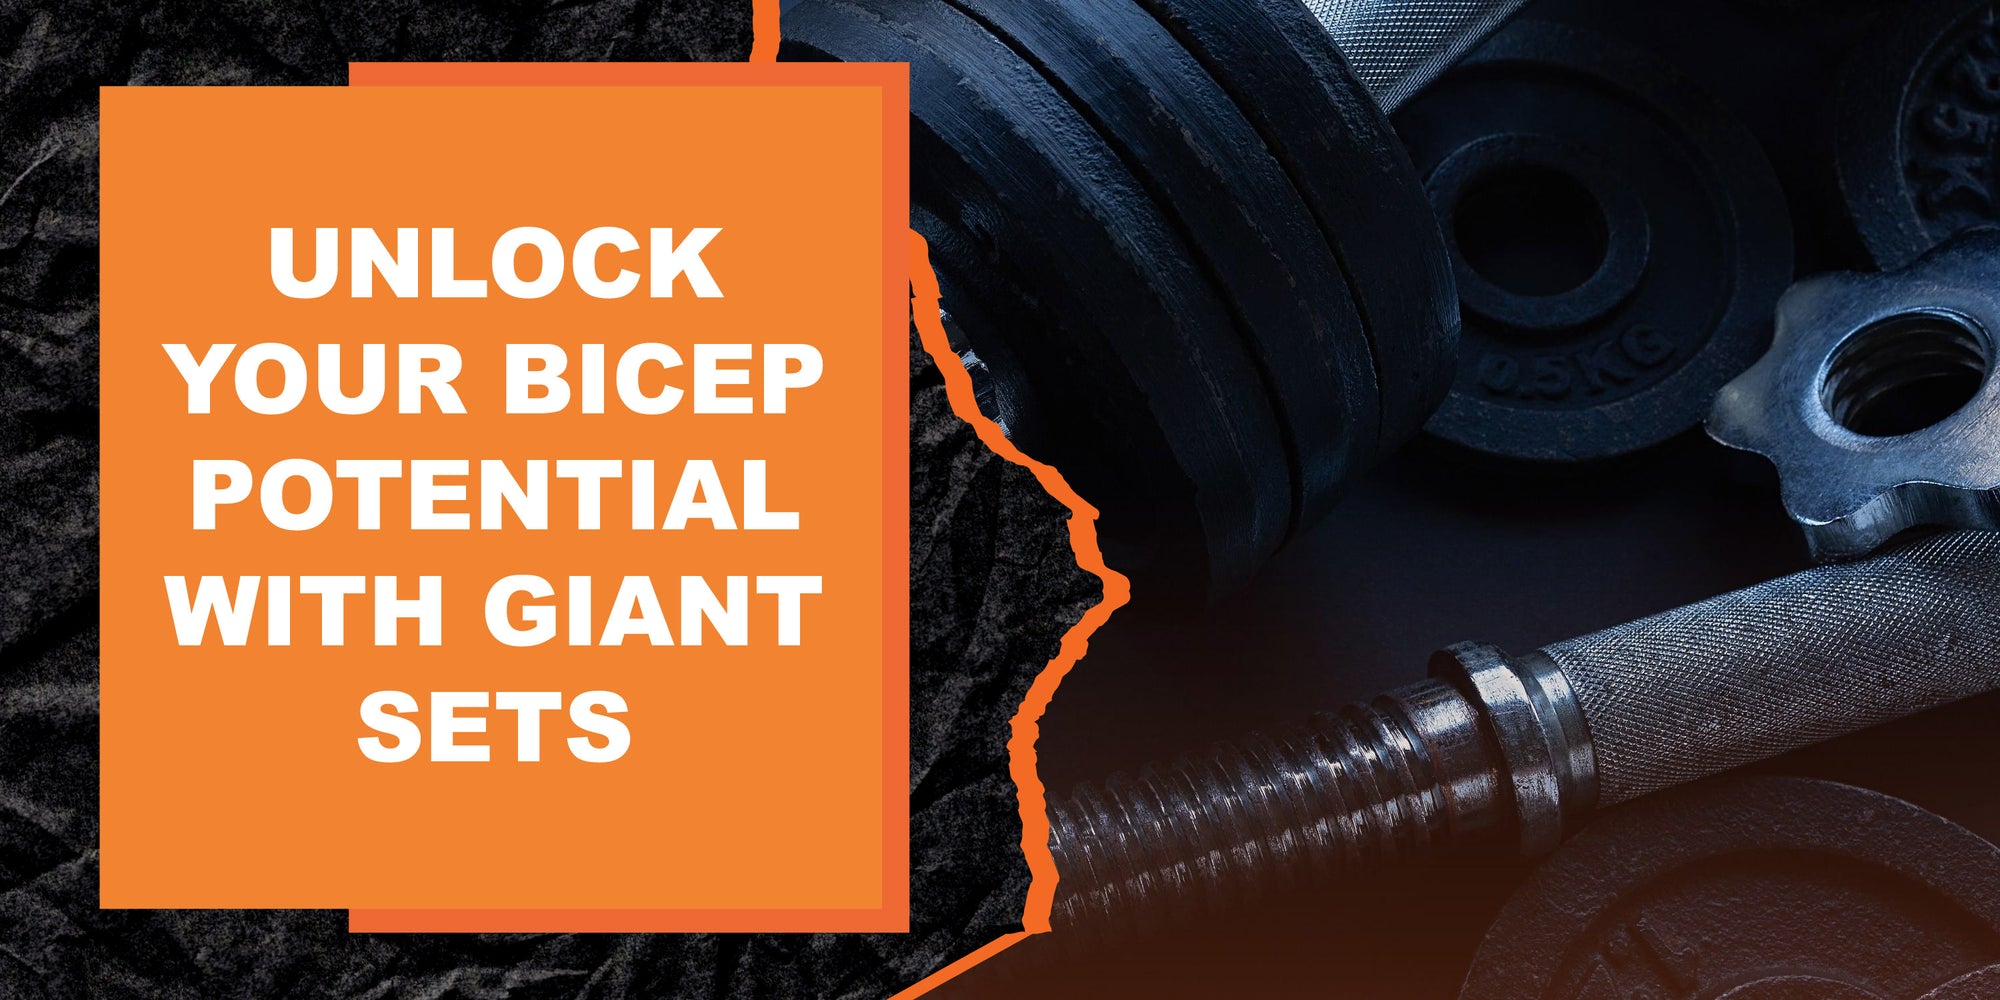 Unlock Your Bicep Potential with Giant Sets